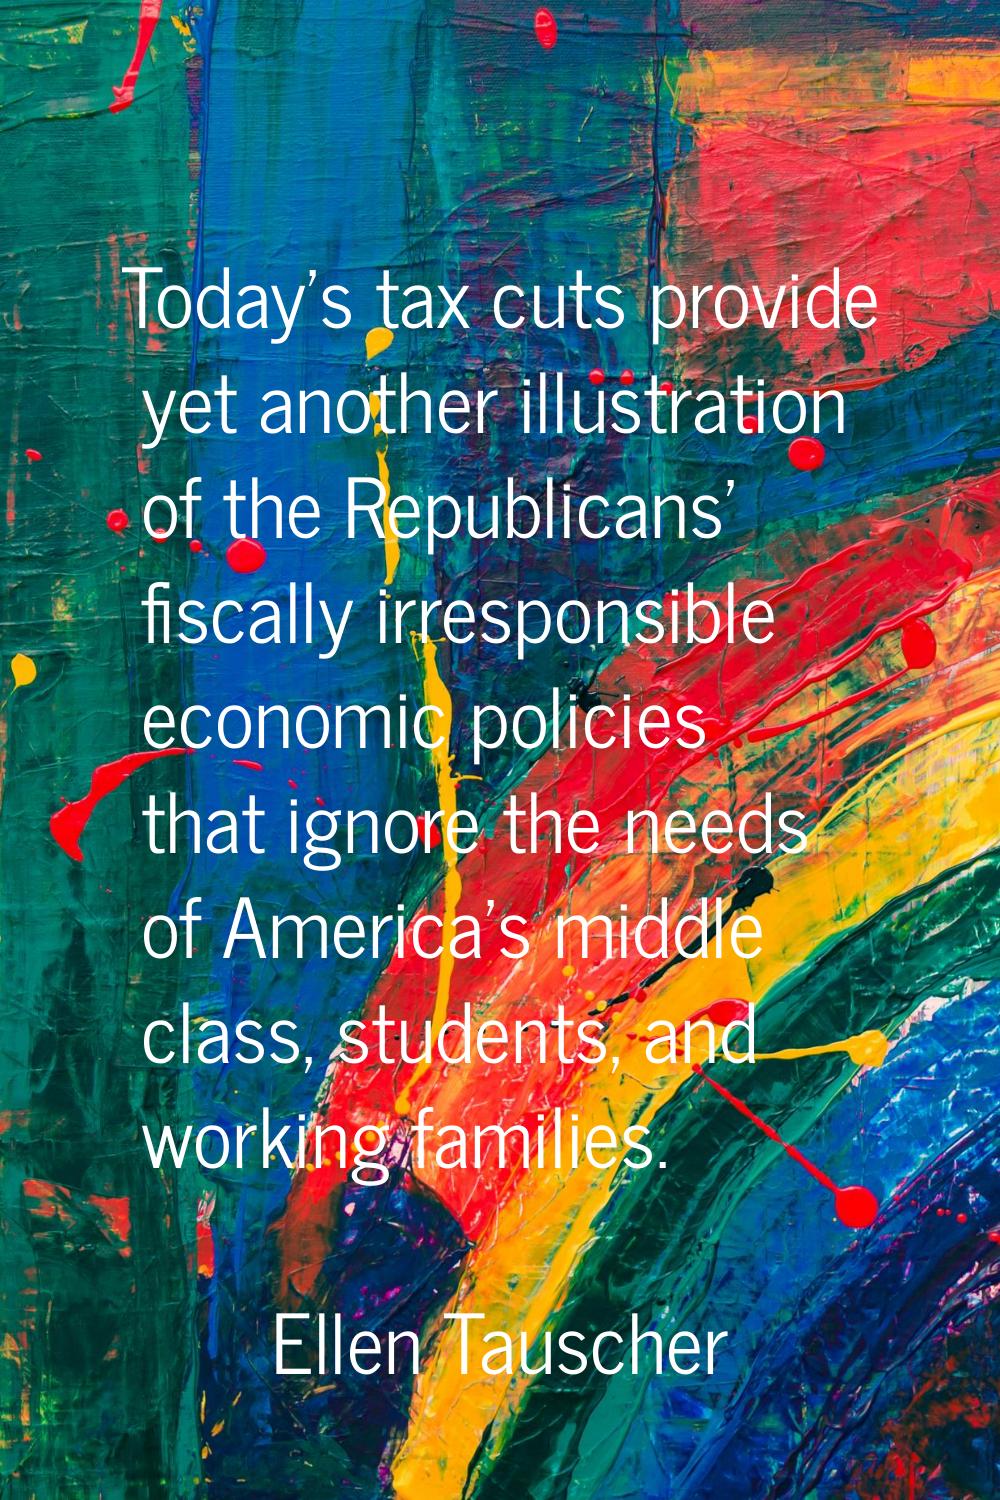 Today's tax cuts provide yet another illustration of the Republicans' fiscally irresponsible econom